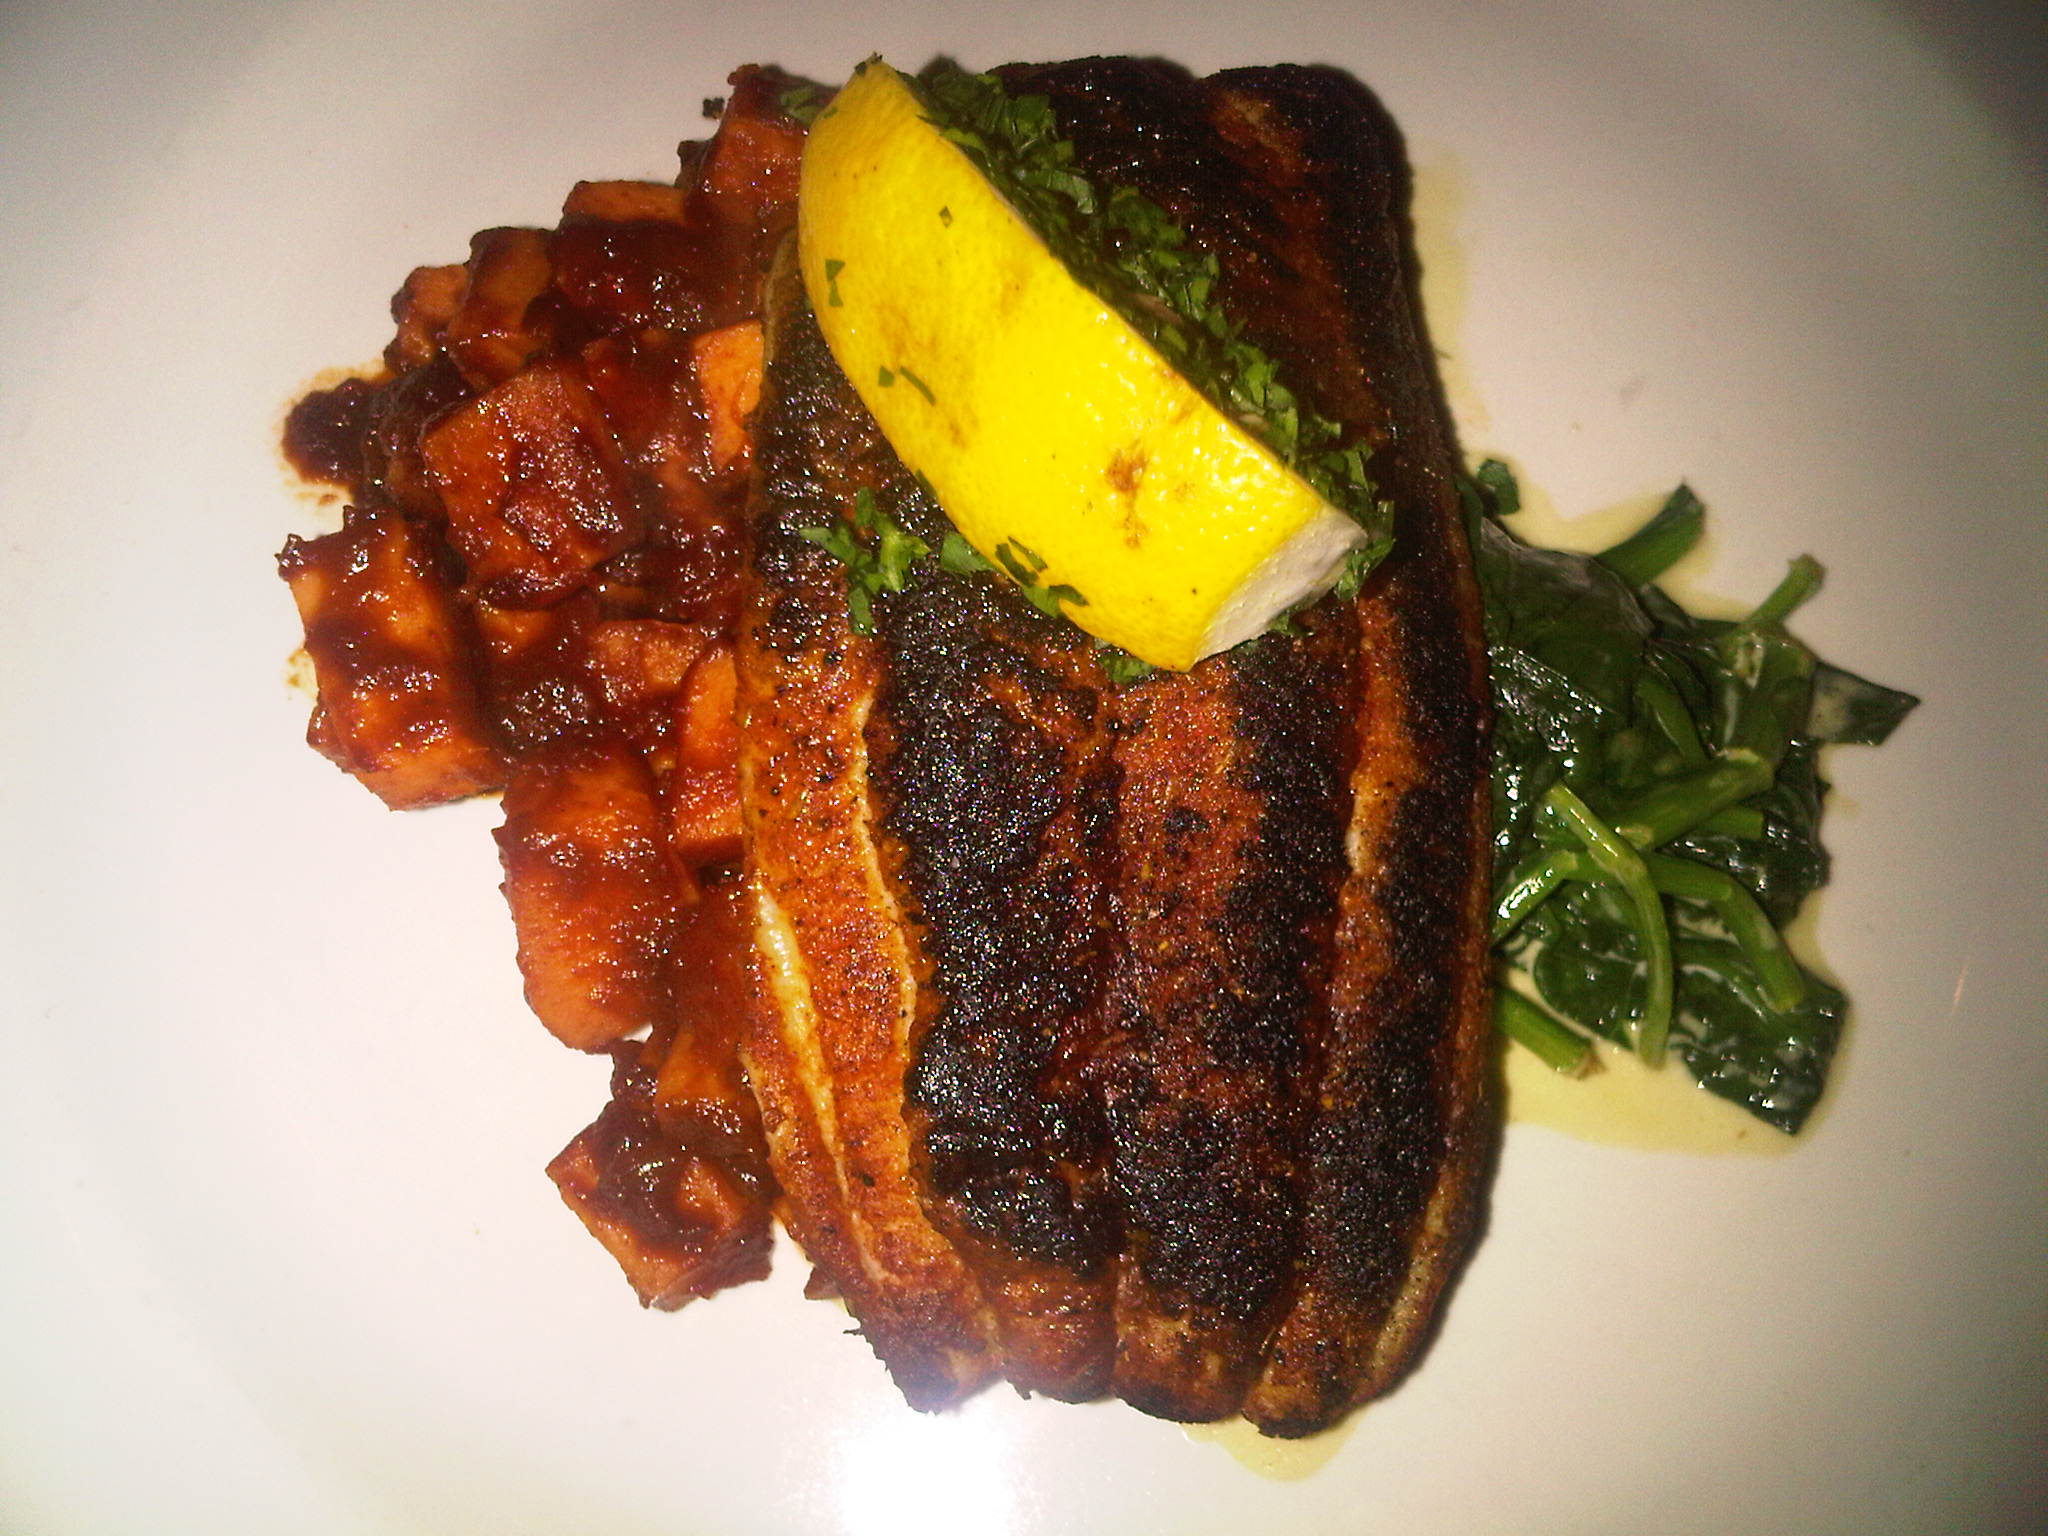 Rothchilds Restaurant Cajun Catfish With Spinach And Barbecued Glazed Sweet Potatoes